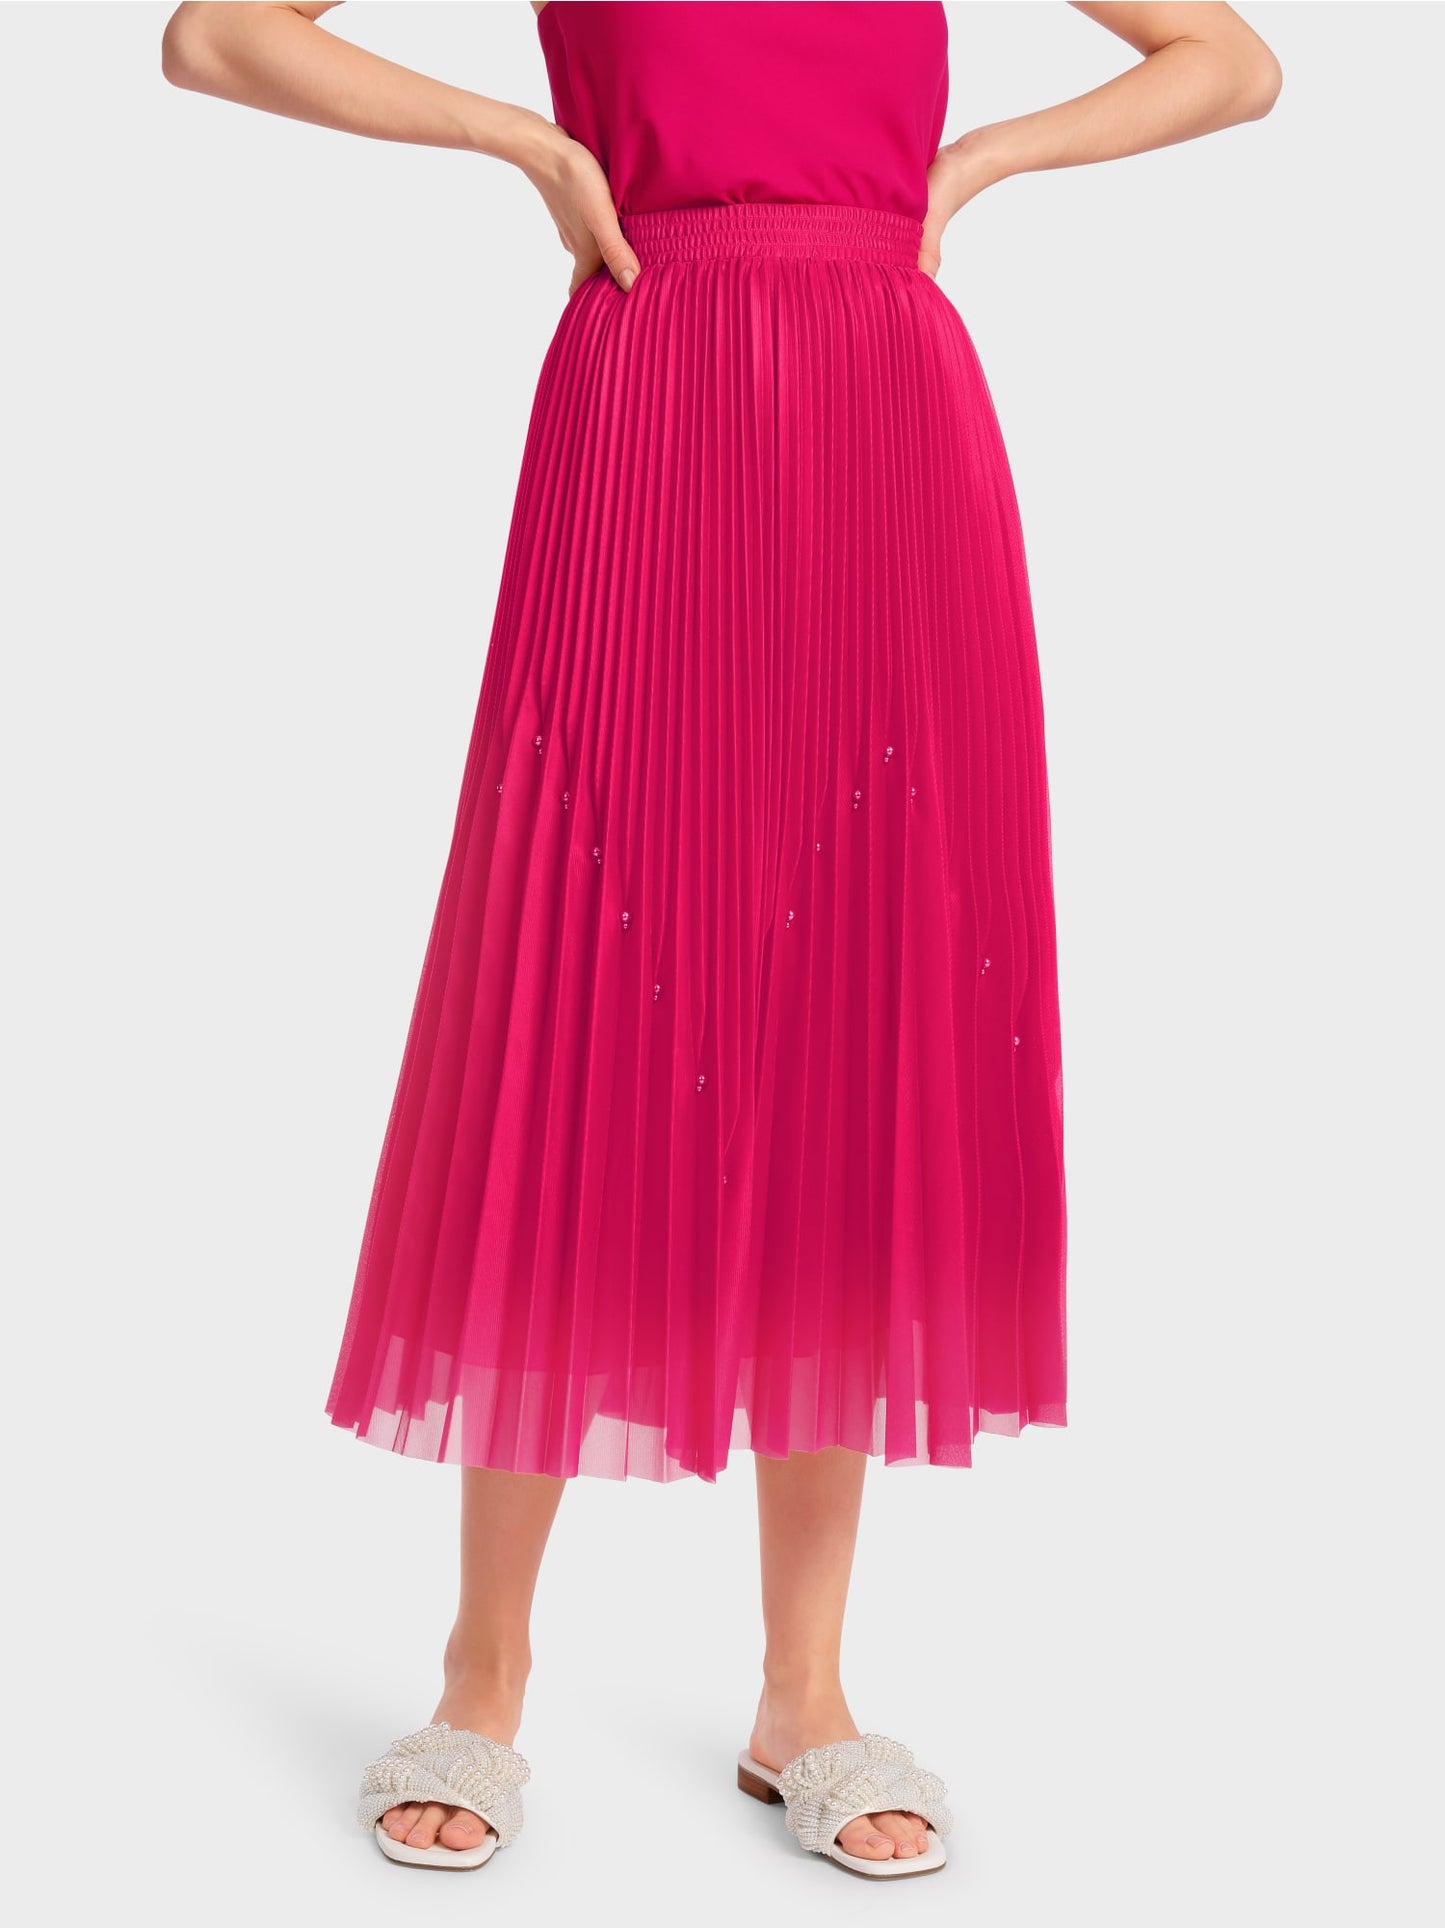 Pleated skirt with beads